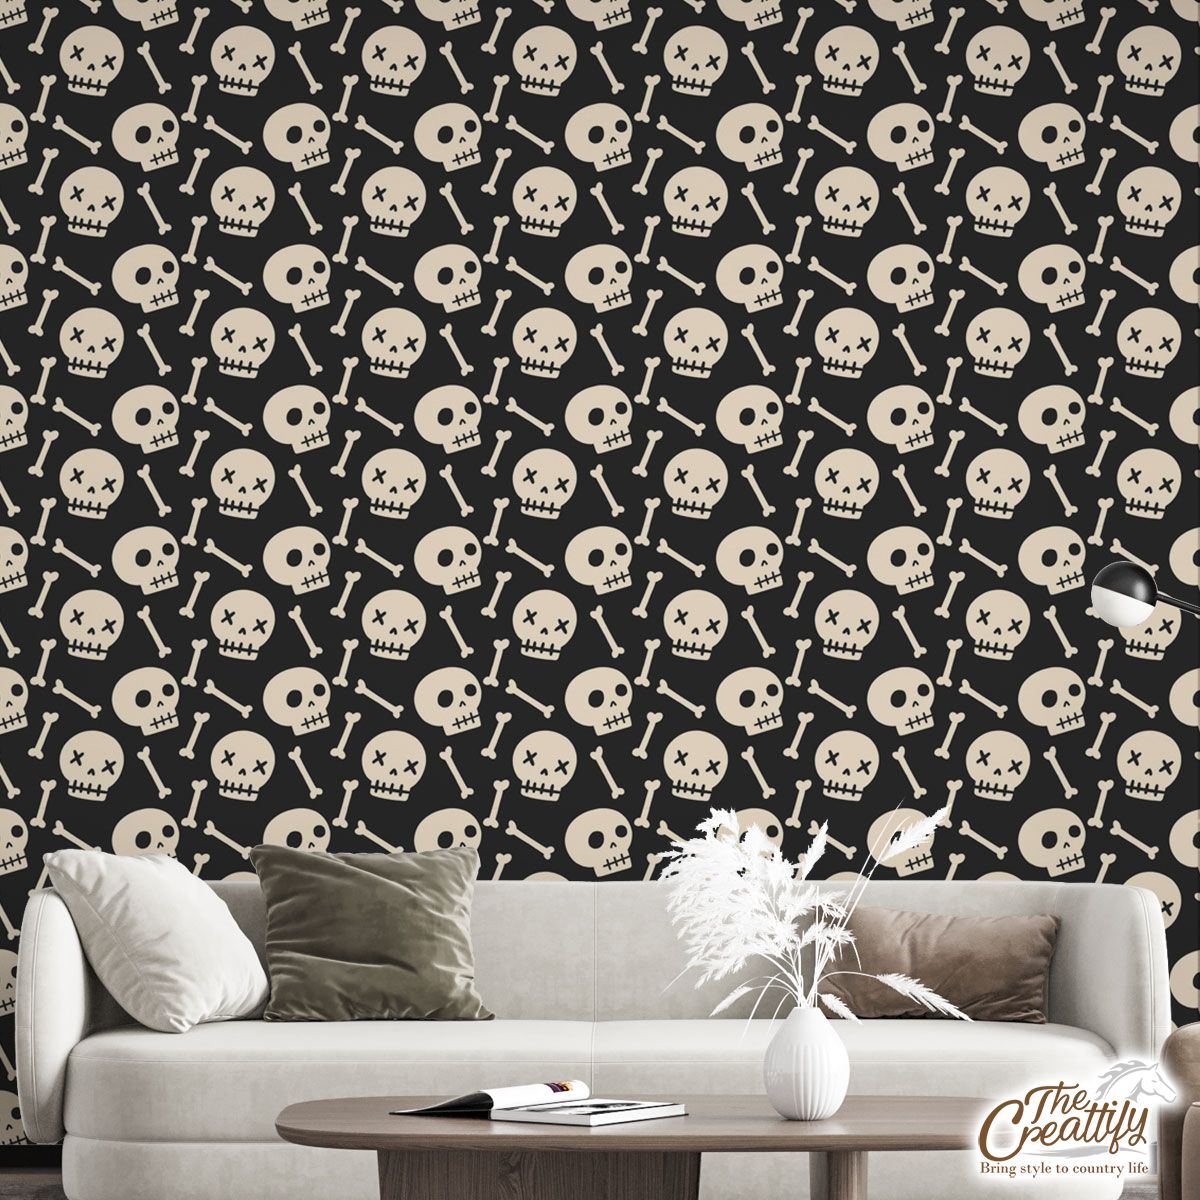 Black And White Halloween Skull And Bones Wall Mural